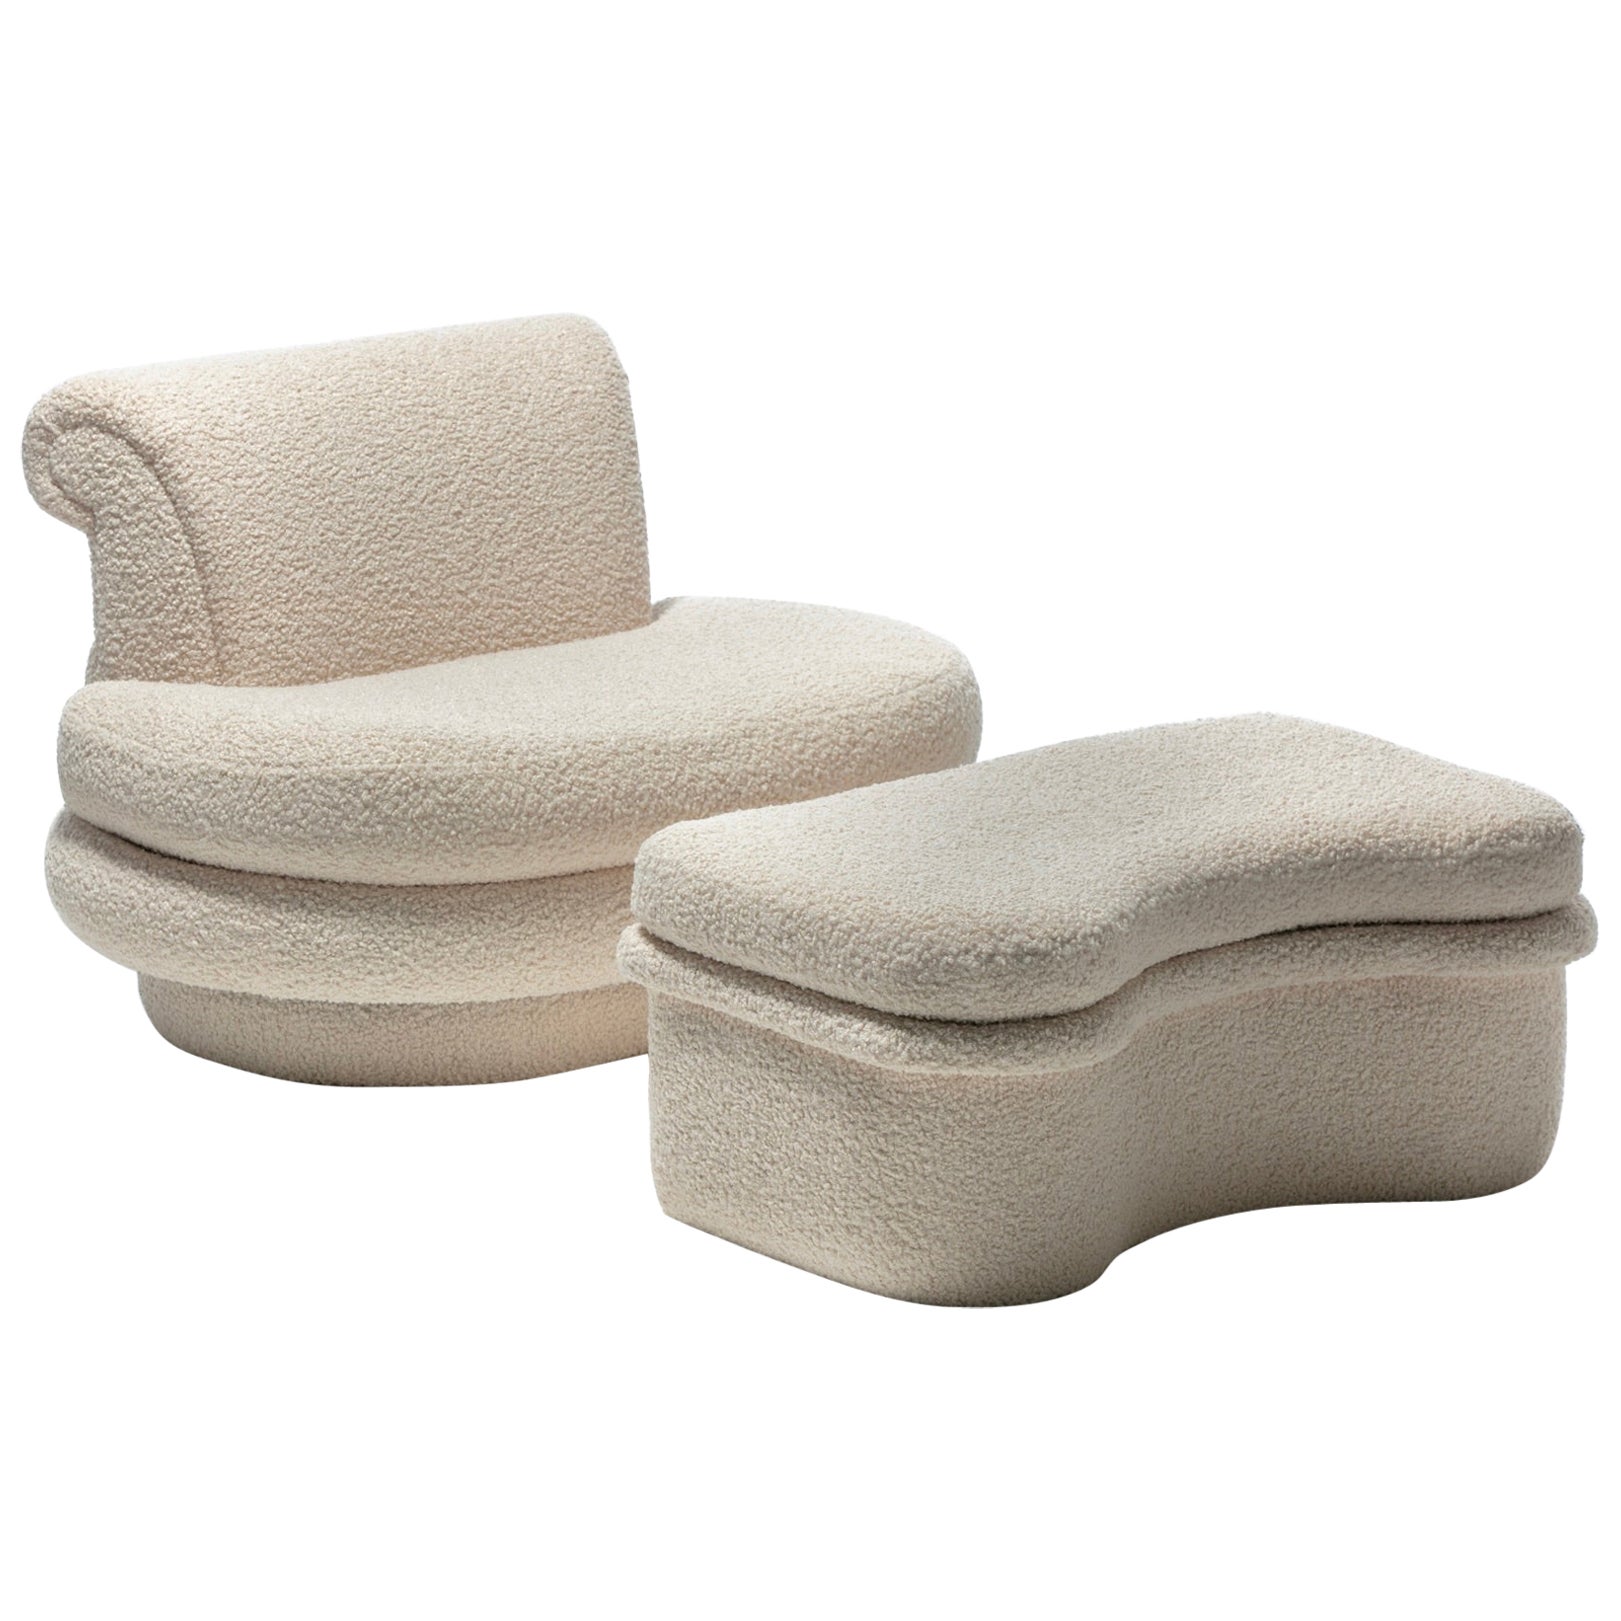 Adrian Pearsall for Comfort Designs Slipper Chair & Ottoman in Ivory Bouclé